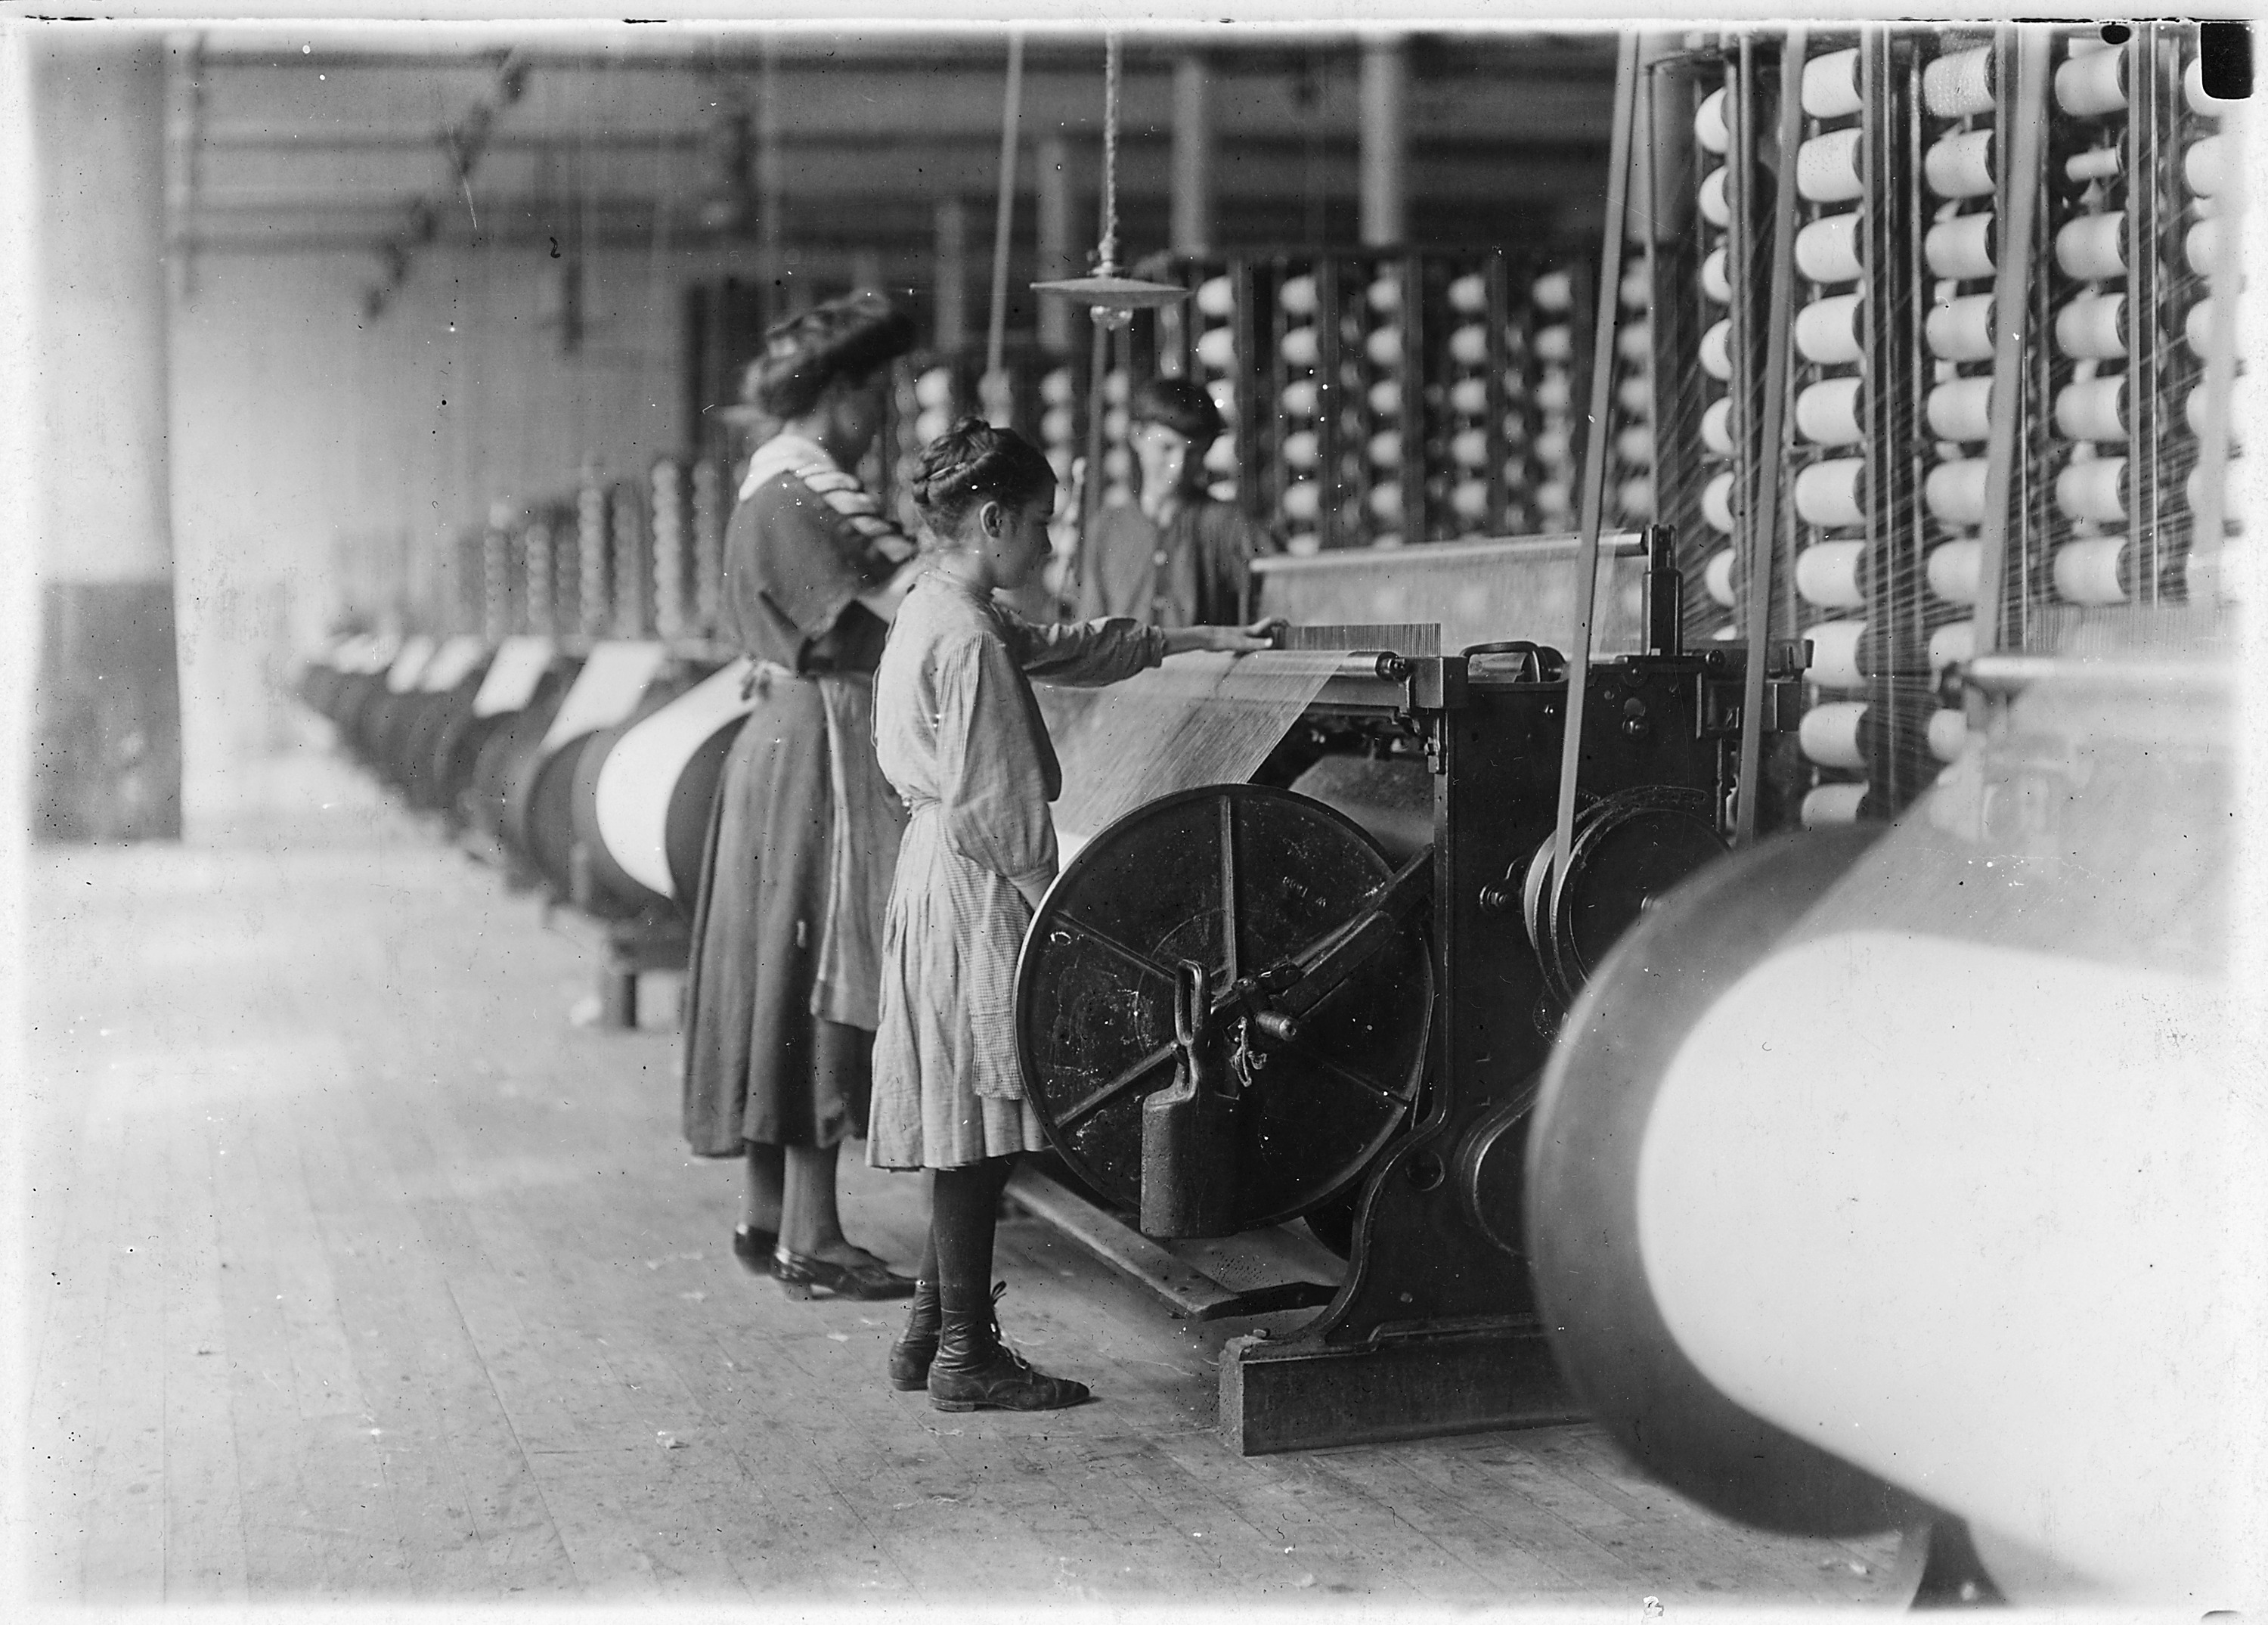 Girls running warping machines in Loray Mill, Gastonia, N.C. Many boys and girls much younger. Boss carefully avoided... - NARA - 523104